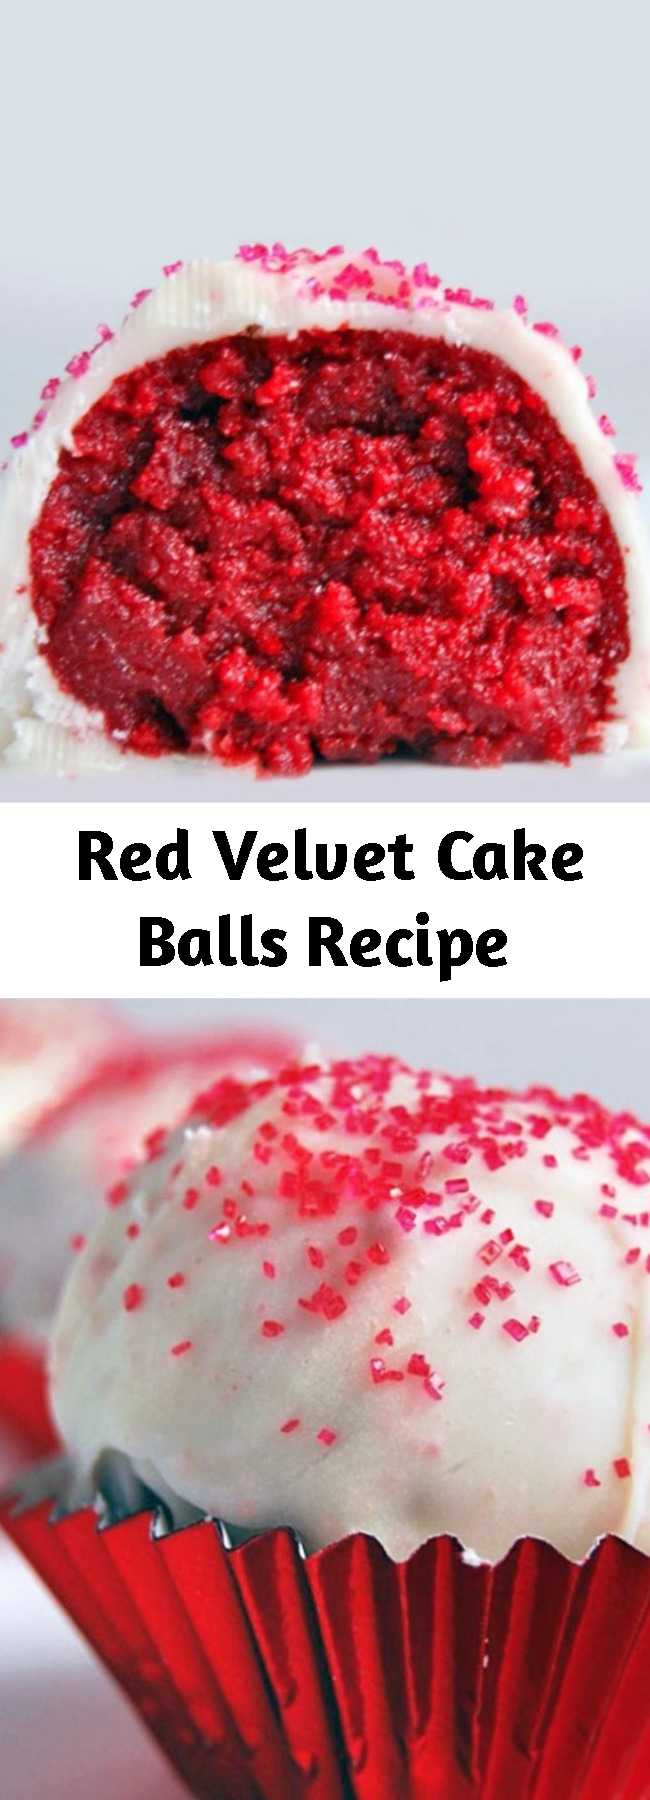 Red Velvet Cake Balls Recipe - Make these Red Velvet Cake Balls from scratch or with a box, by yourself or with the kids. They're as versatile as you need and as delicious as you're expecting. These are Truly Delicious Beyond Belief And While They Take Longer To Make, The Extra Effort Gives You That Truly Homemade Flavor.